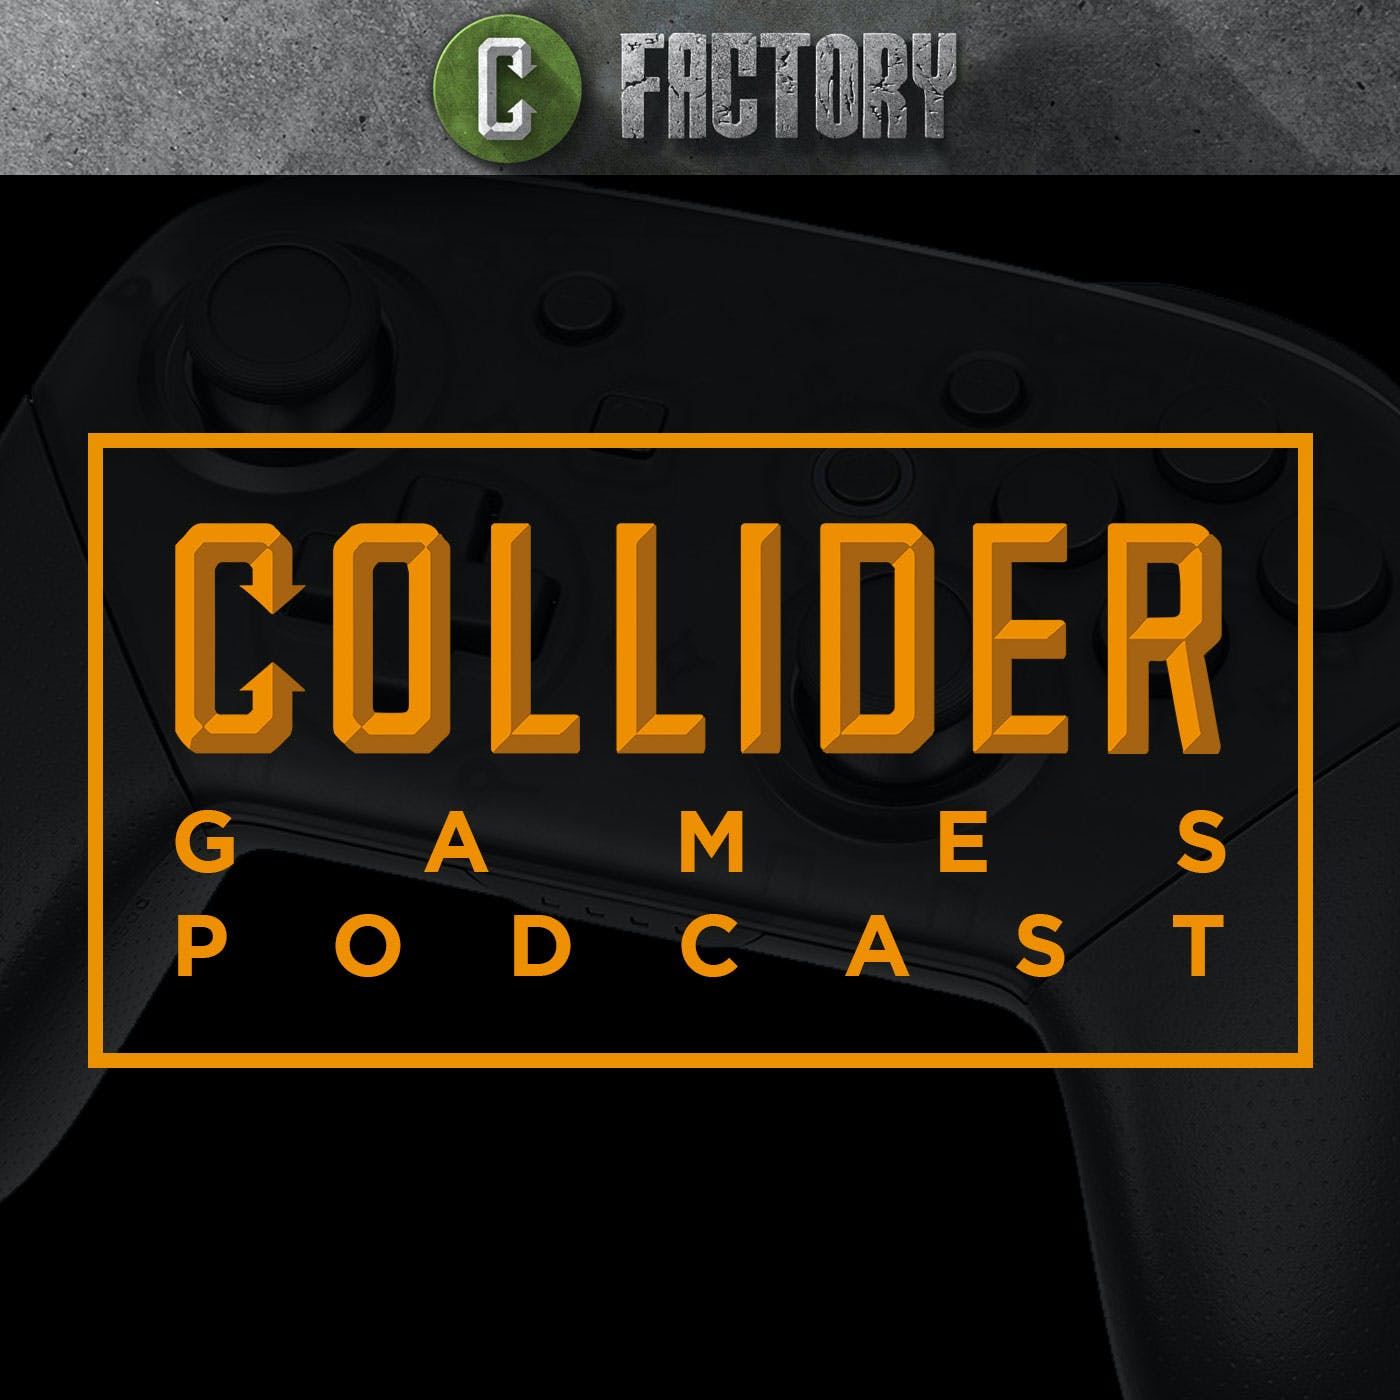 Assassin’s Creed Valhalla Announcement, The Last of Us Part 2 Leaks, and Fallout 76 Wastelanders Reaction - Collider Games Podcast